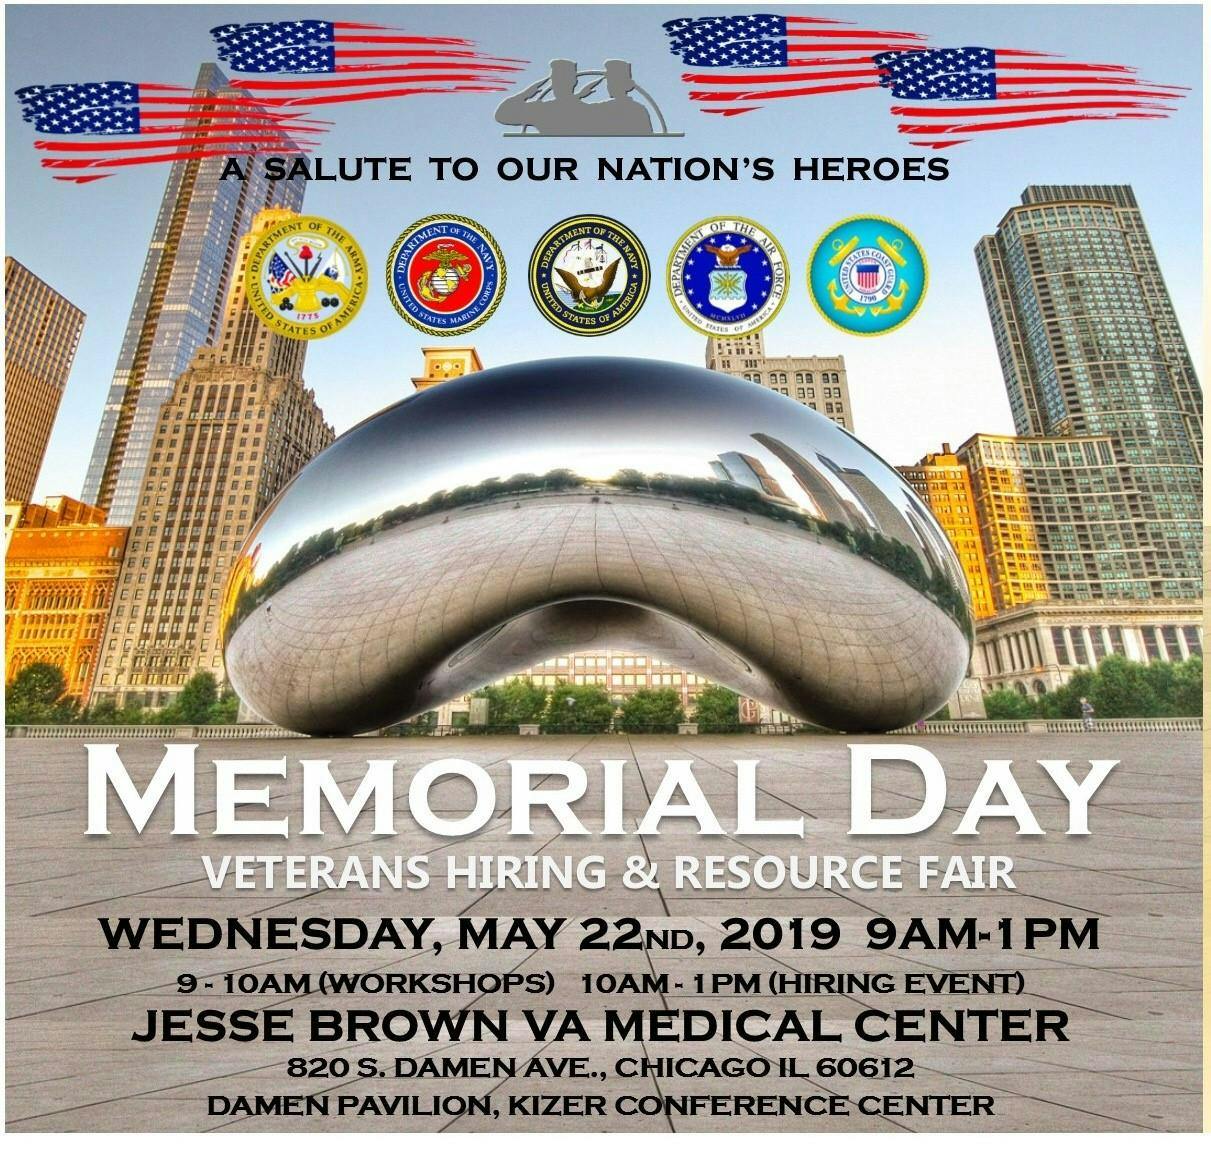 Memorial Day Veterans Hiring and Resource Fair May 22nd, Wednesday